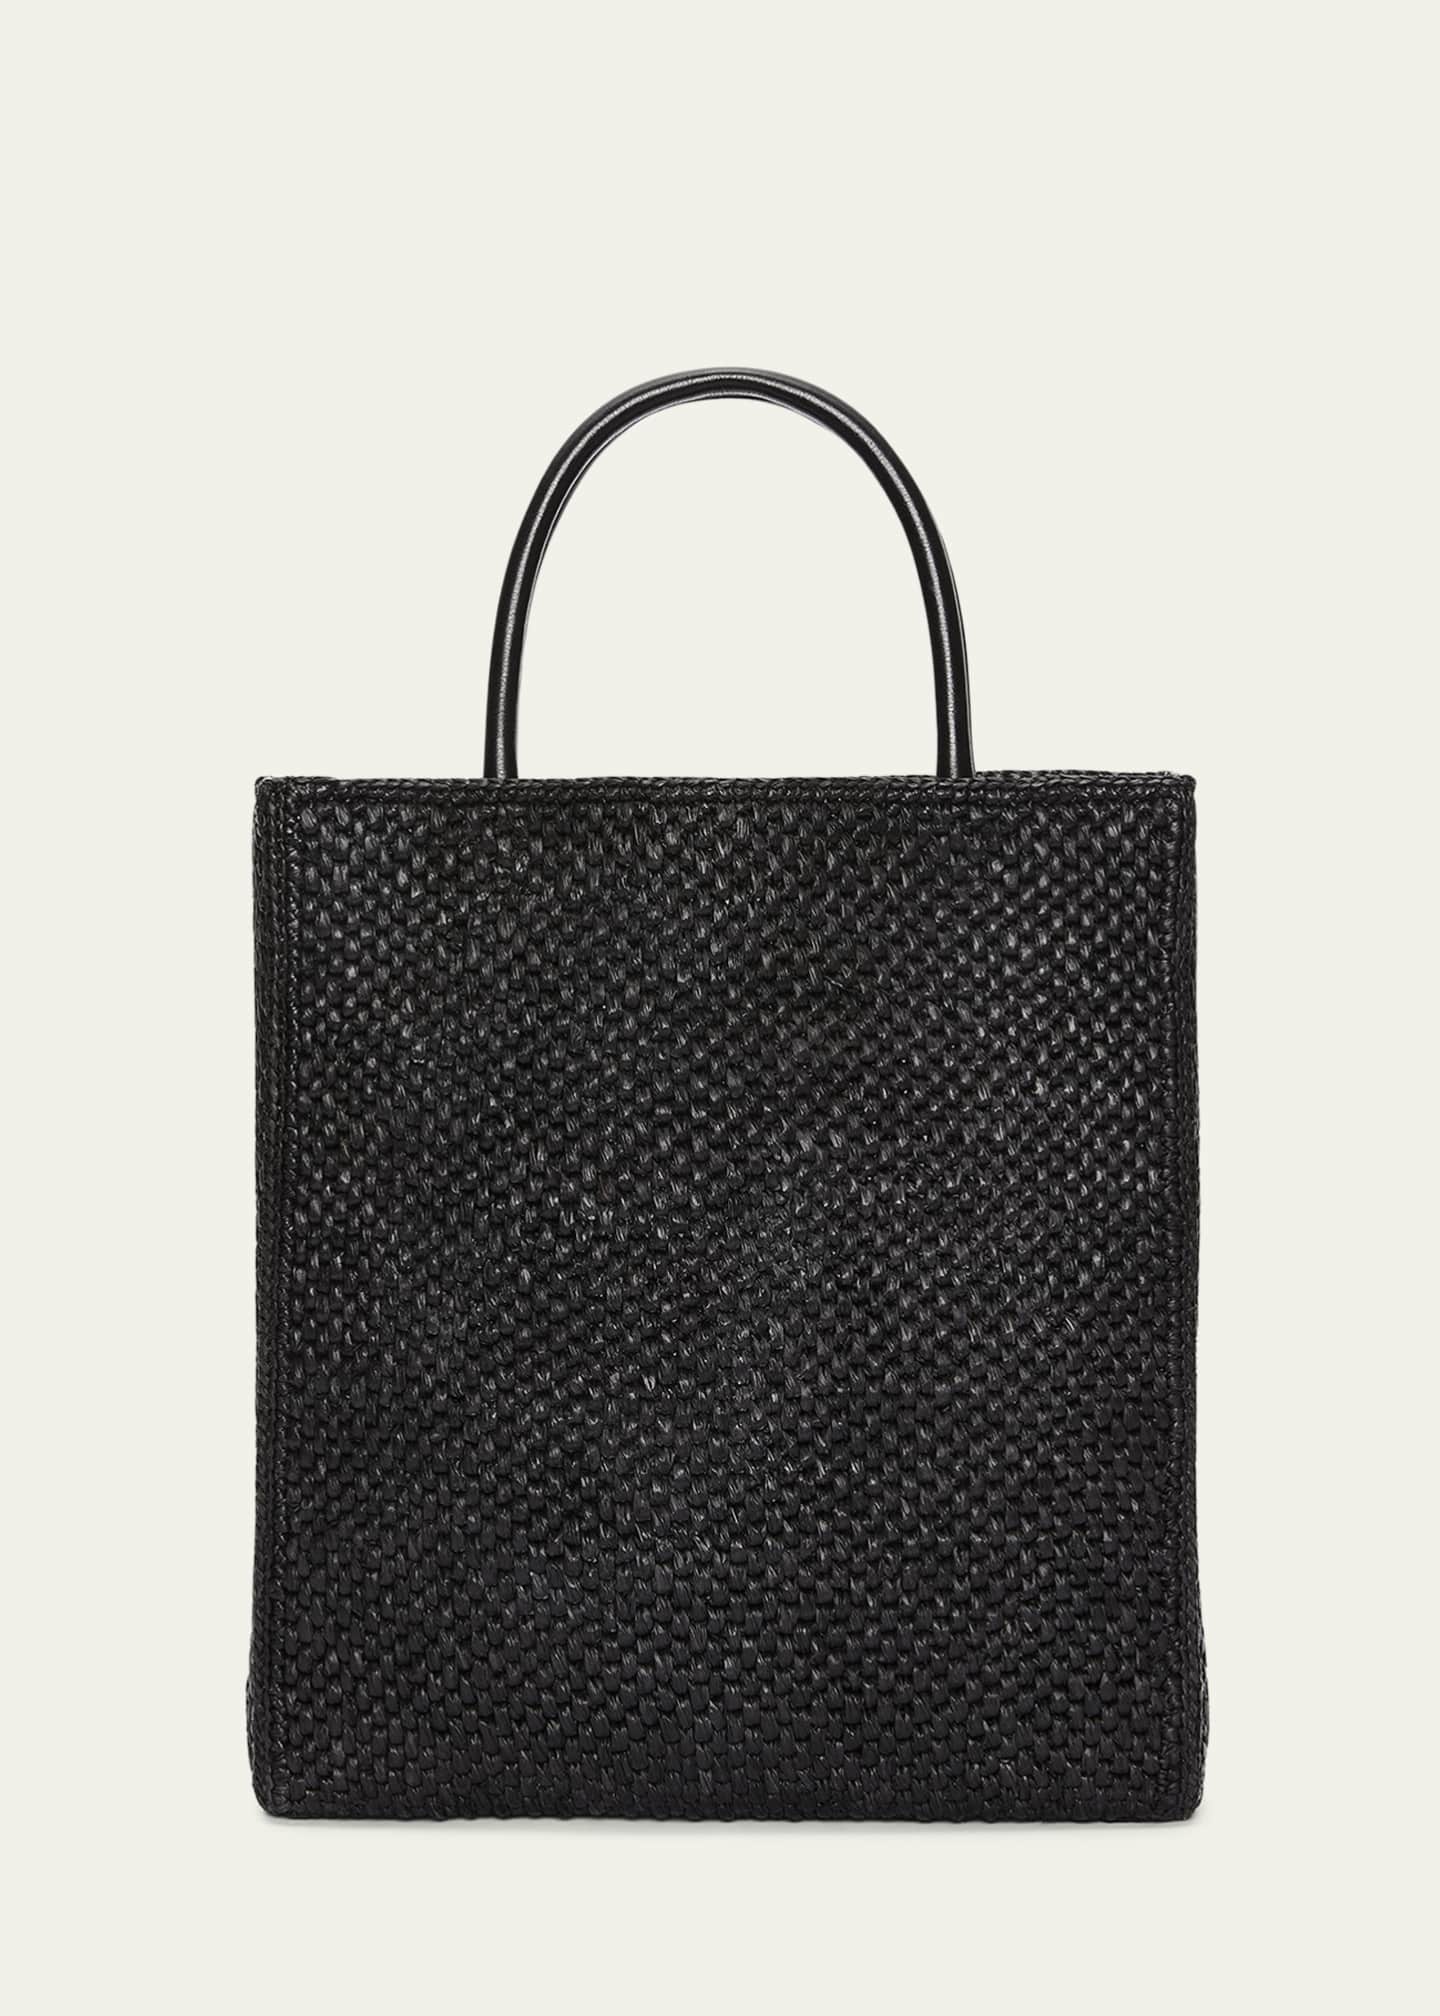 Standard A4 leather tote